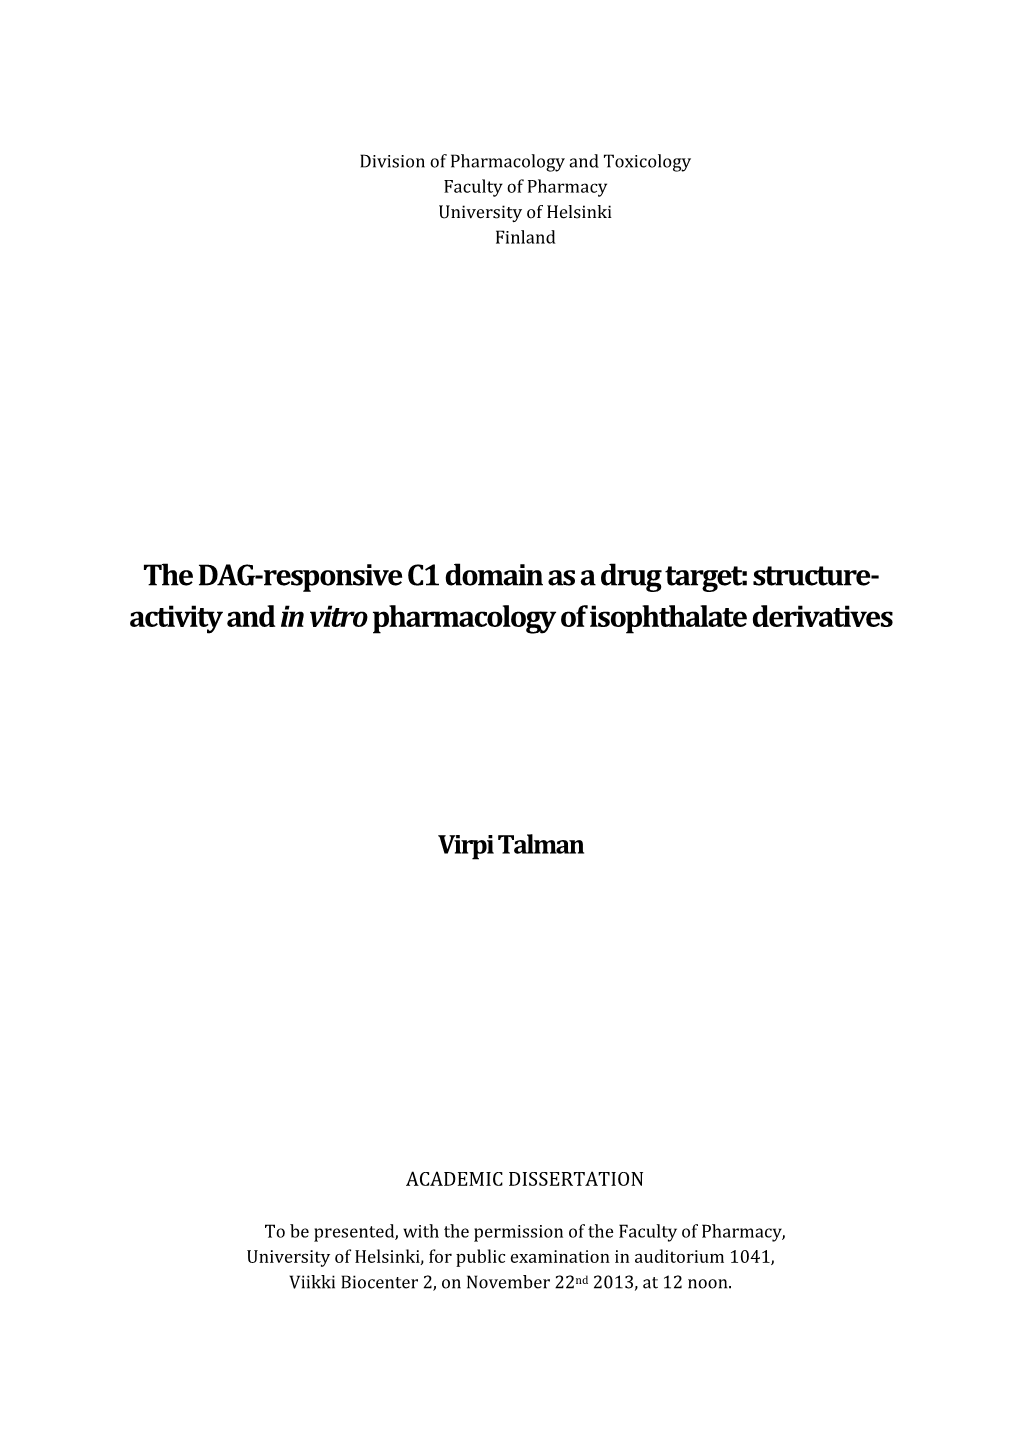 The DAG-Responsive C1 Domain As a Drug Target: Structure- Activity and in Vitro Pharmacology of Isophthalate Derivatives